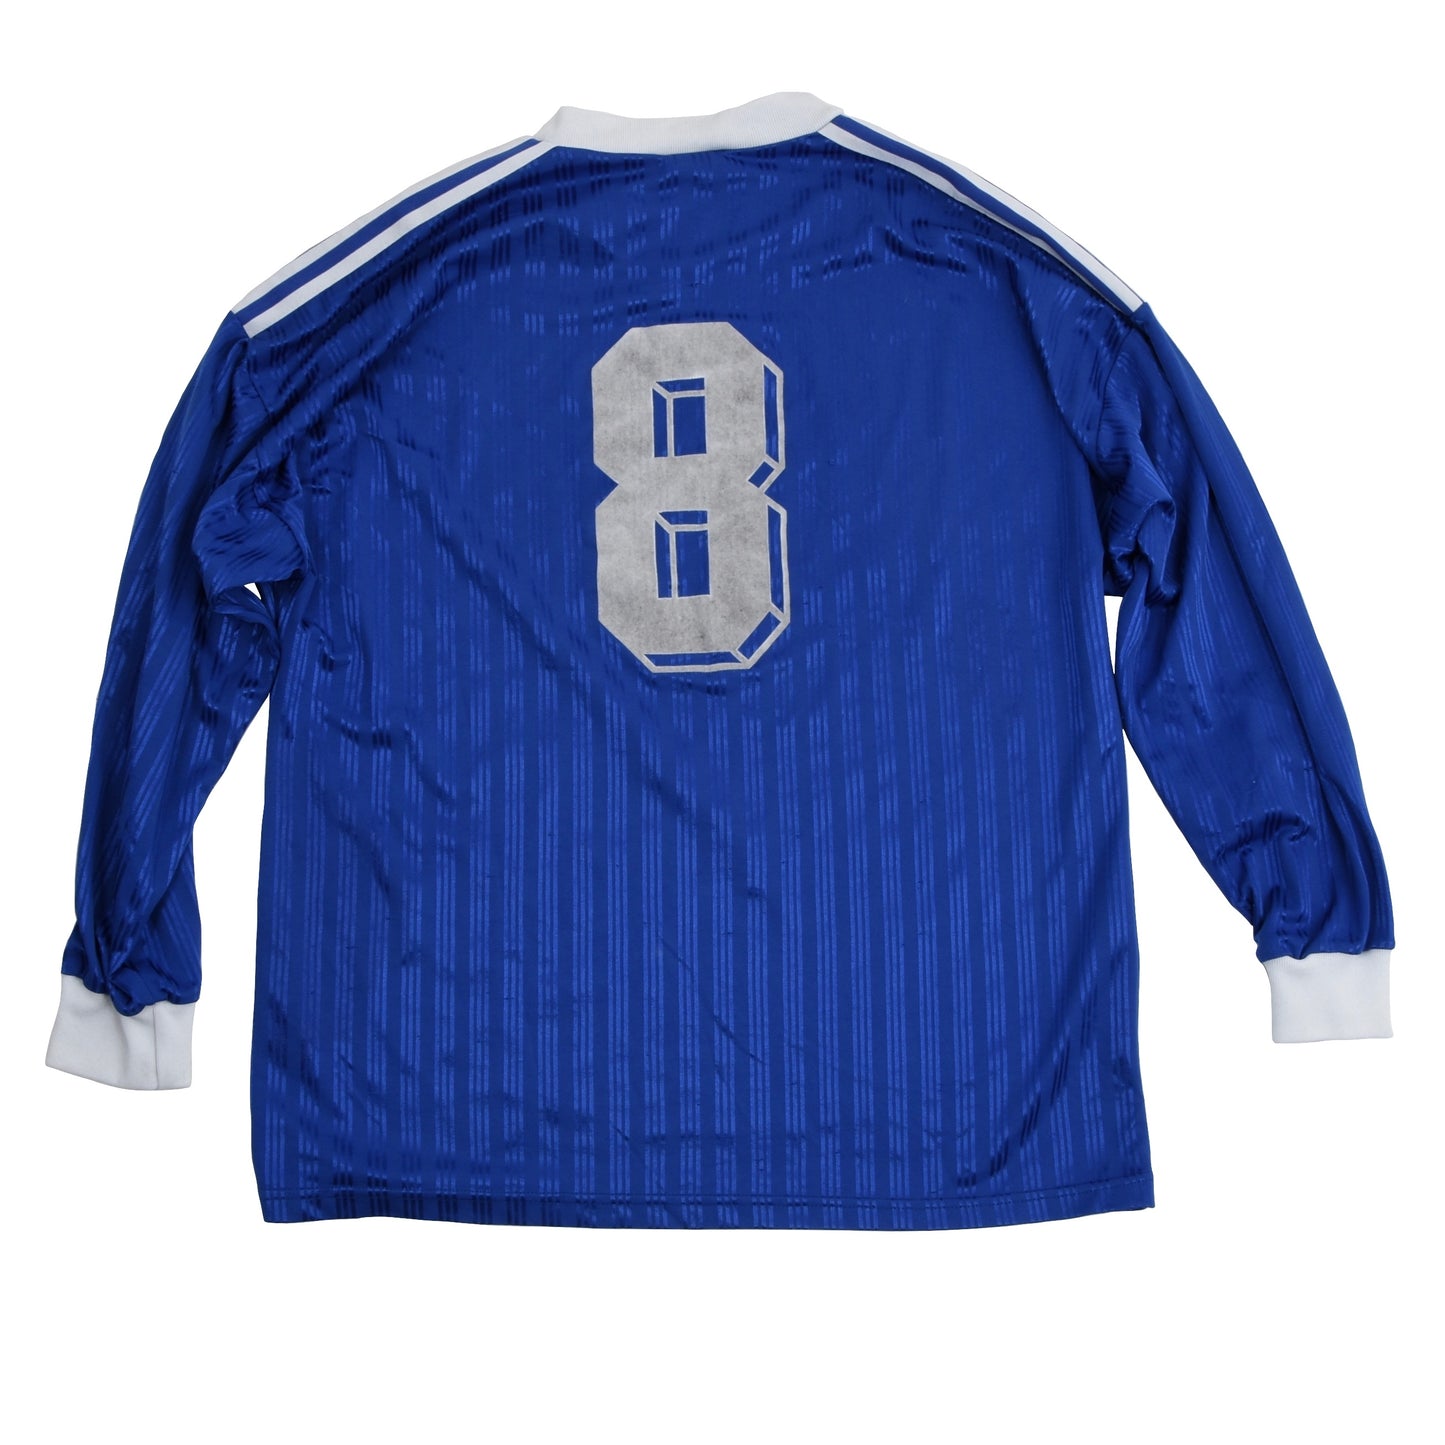 Vintage Adidas Long-Sleeved Jersey Size XL #8 - Blue